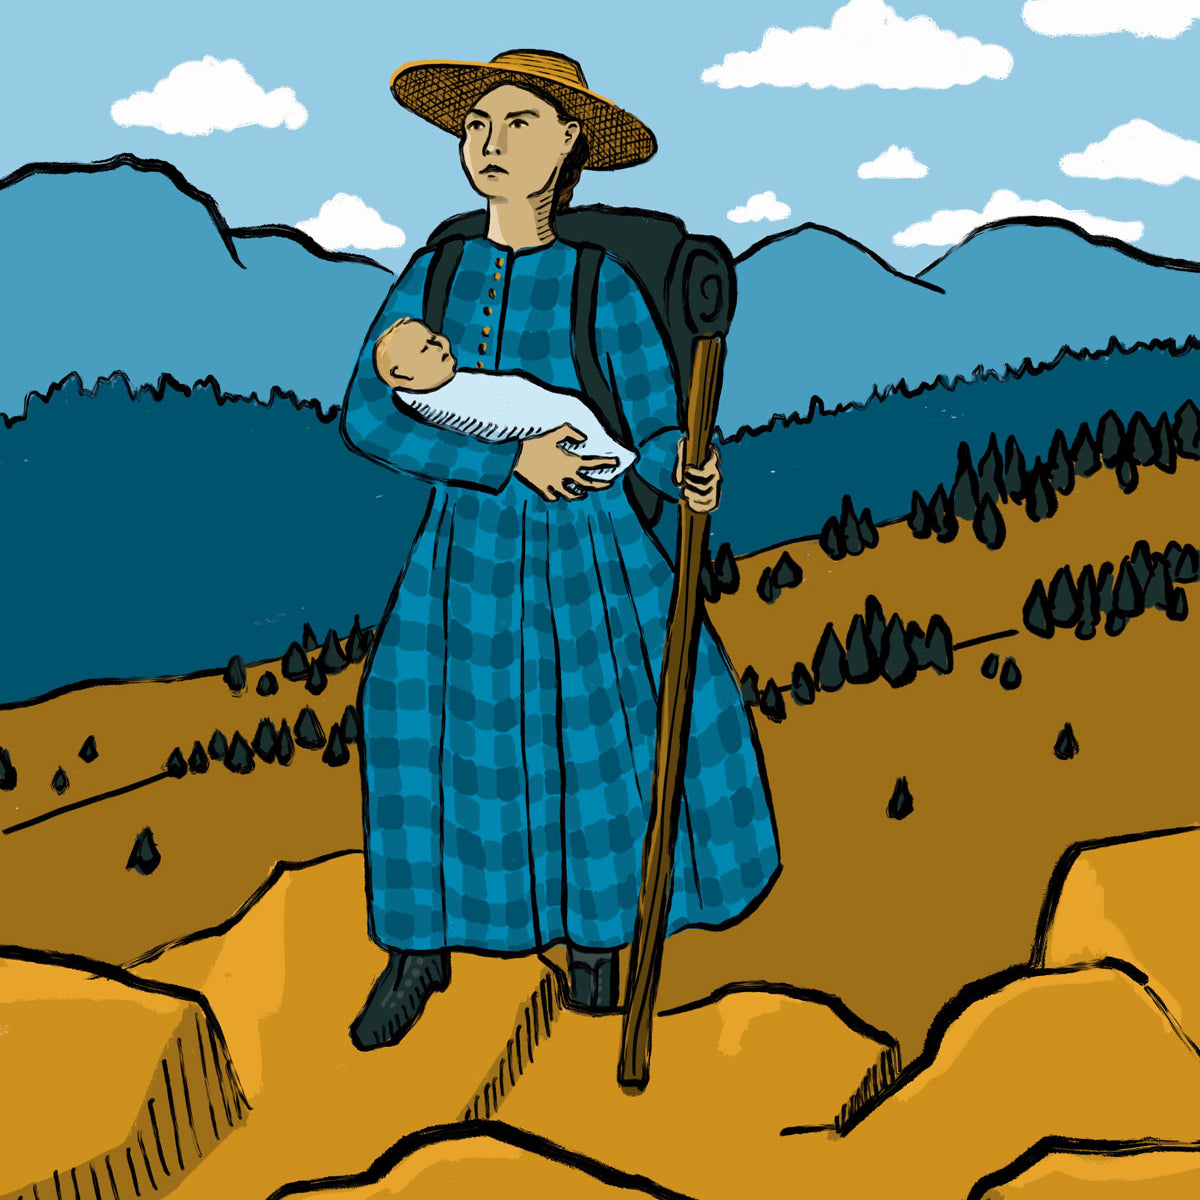 An illustration of a woman in the 1800s wearing a plaid dress and carrying a baby while hiking in the mountains